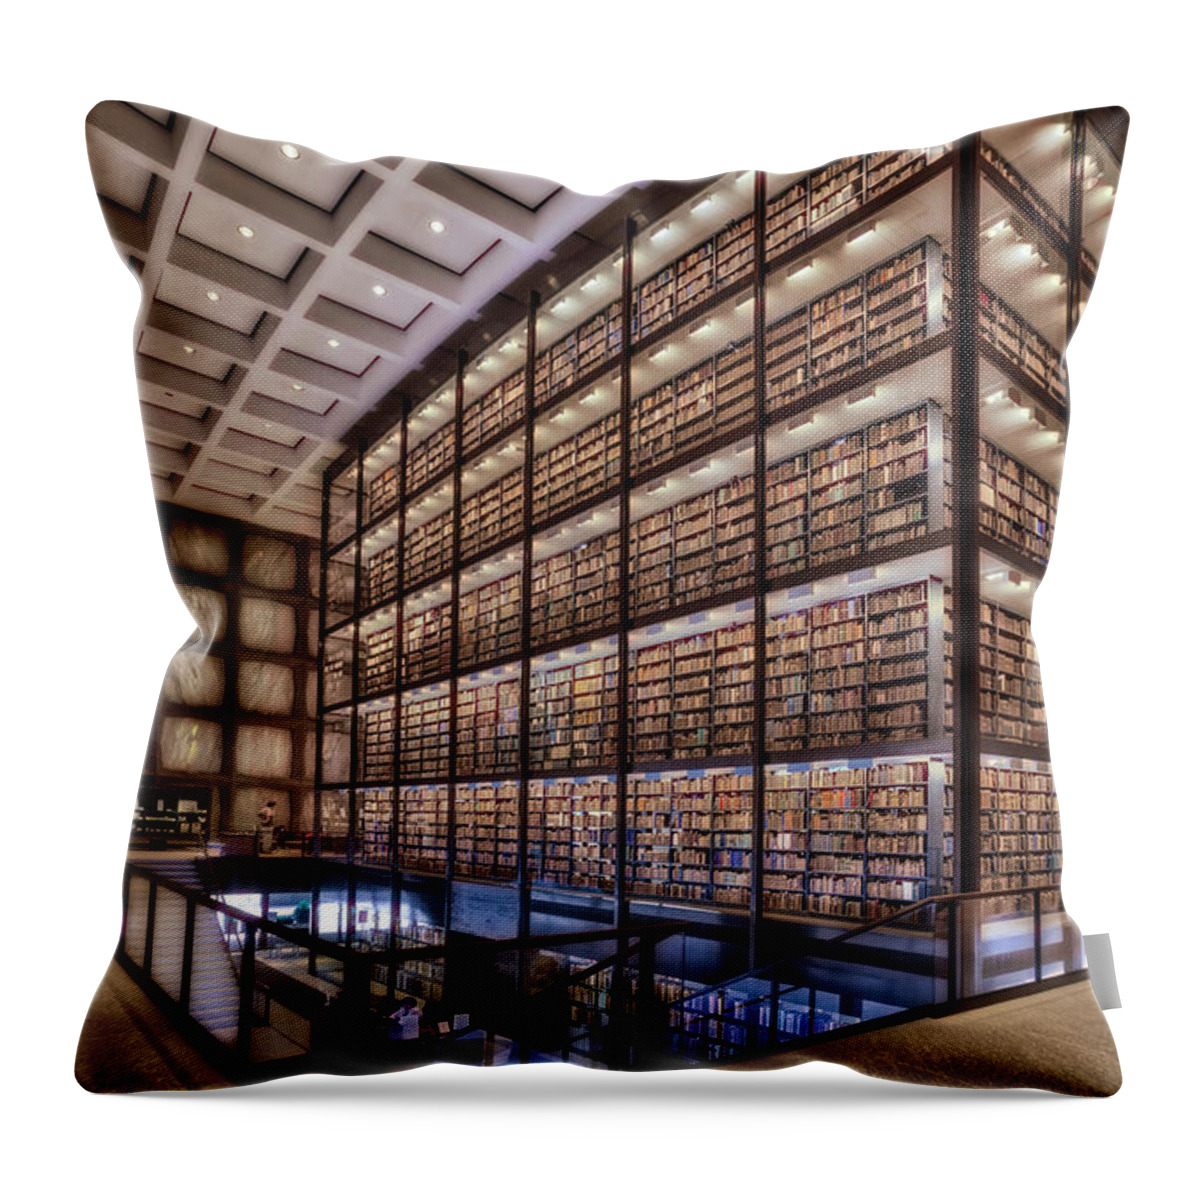 Yale University Library Throw Pillow featuring the photograph Beinecke Rare Book and Manuscript Library by Susan Candelario